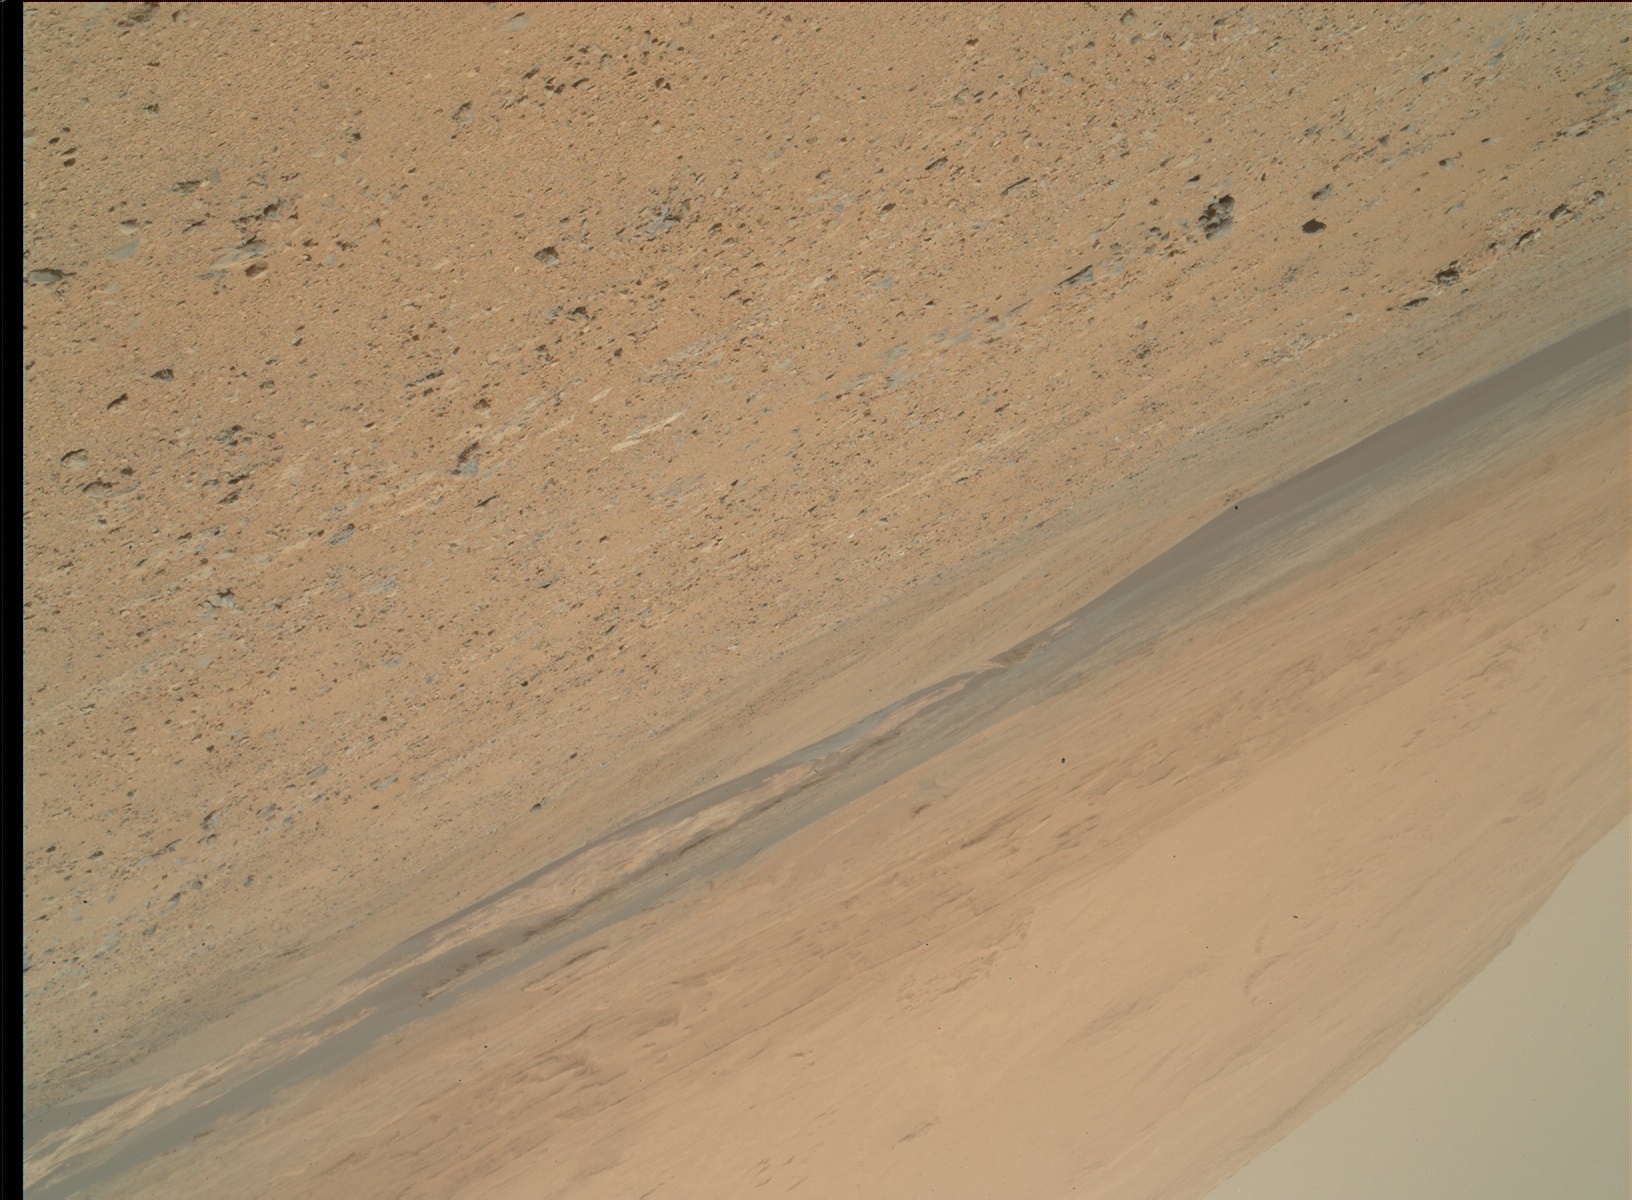 Nasa's Mars rover Curiosity acquired this image using its Mars Hand Lens Imager (MAHLI) on Sol 336